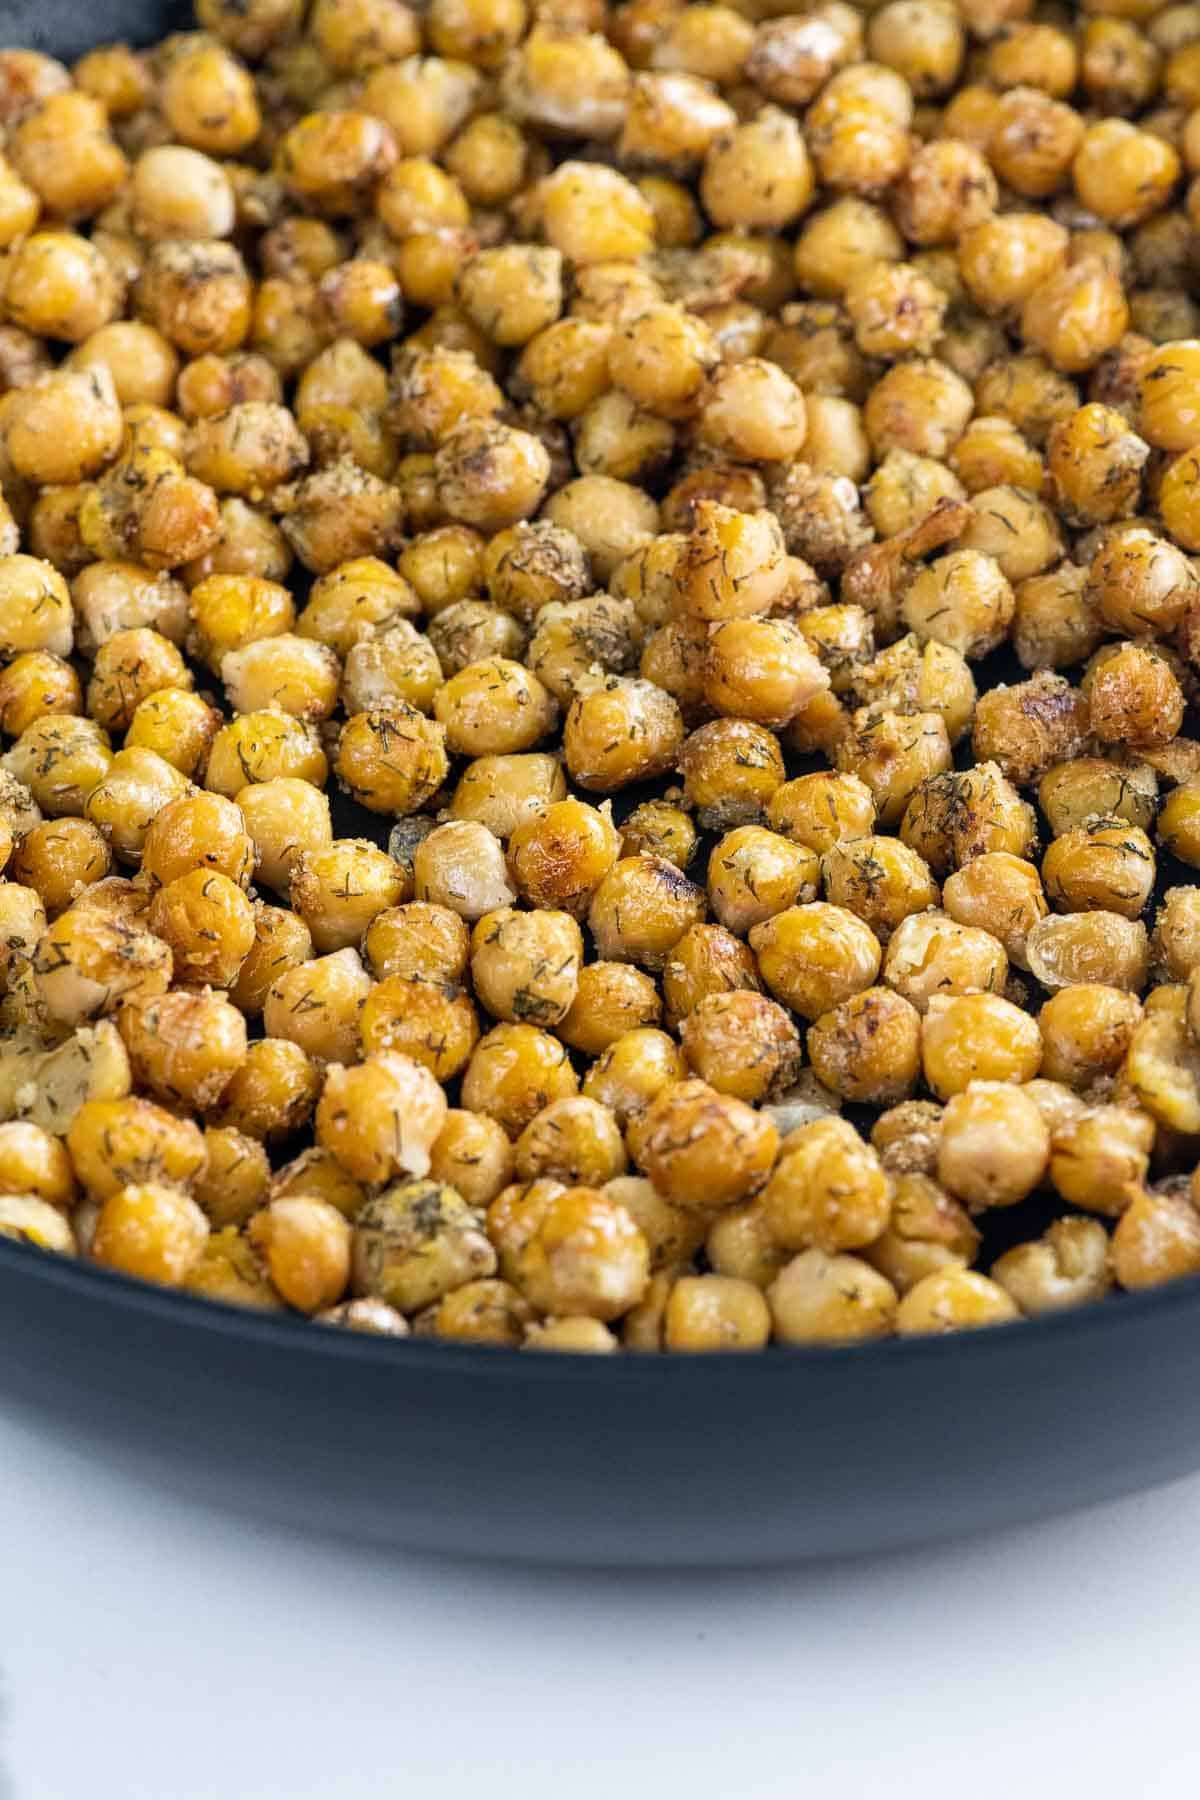 sauteed chickpeas in a frying pan